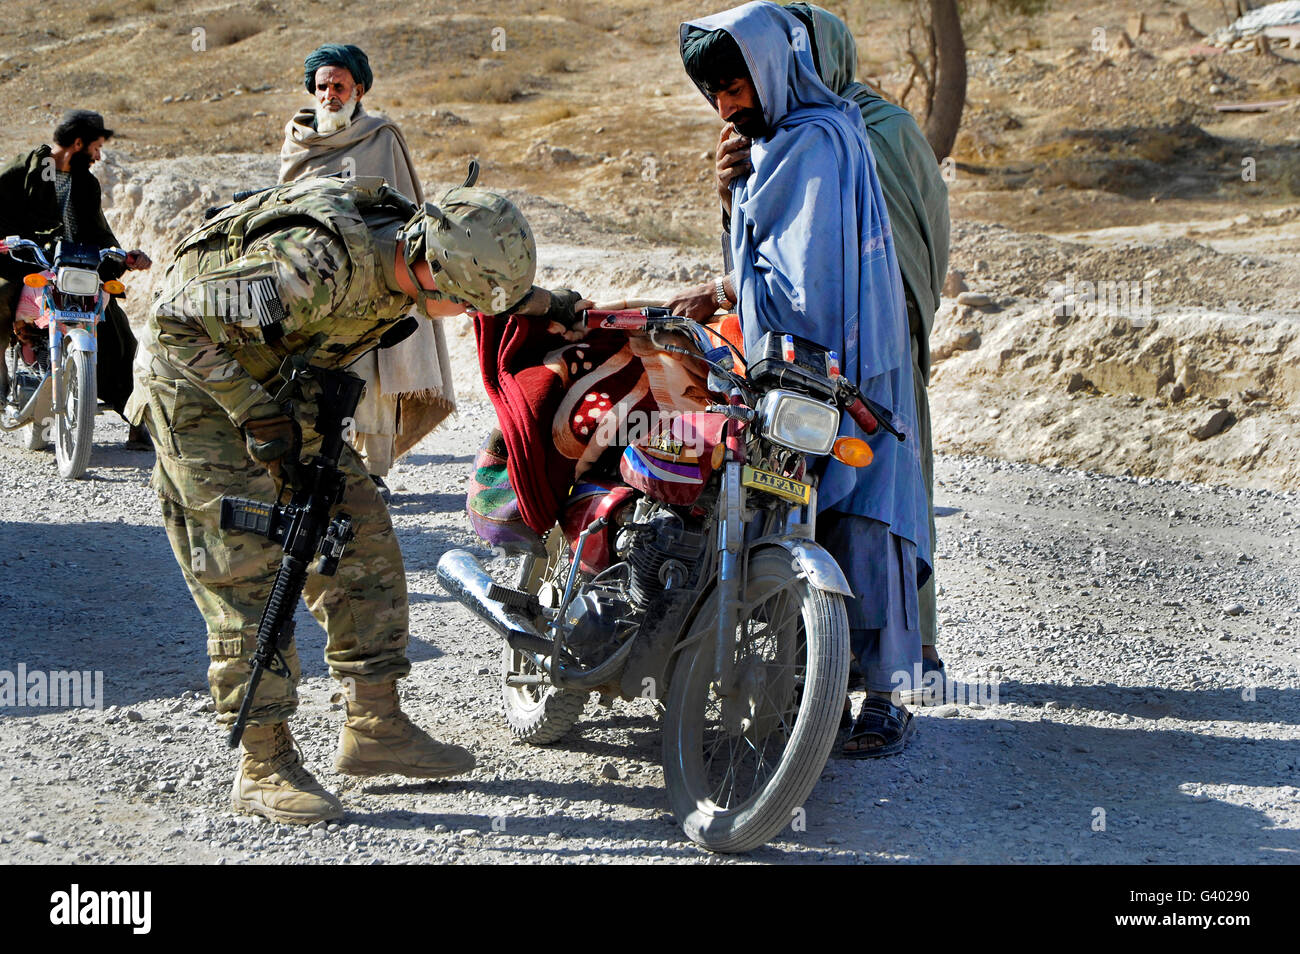 U.S. Army soldier conducts vehicle and personnel searches at a checkpoint in Afghanistan. Stock Photo